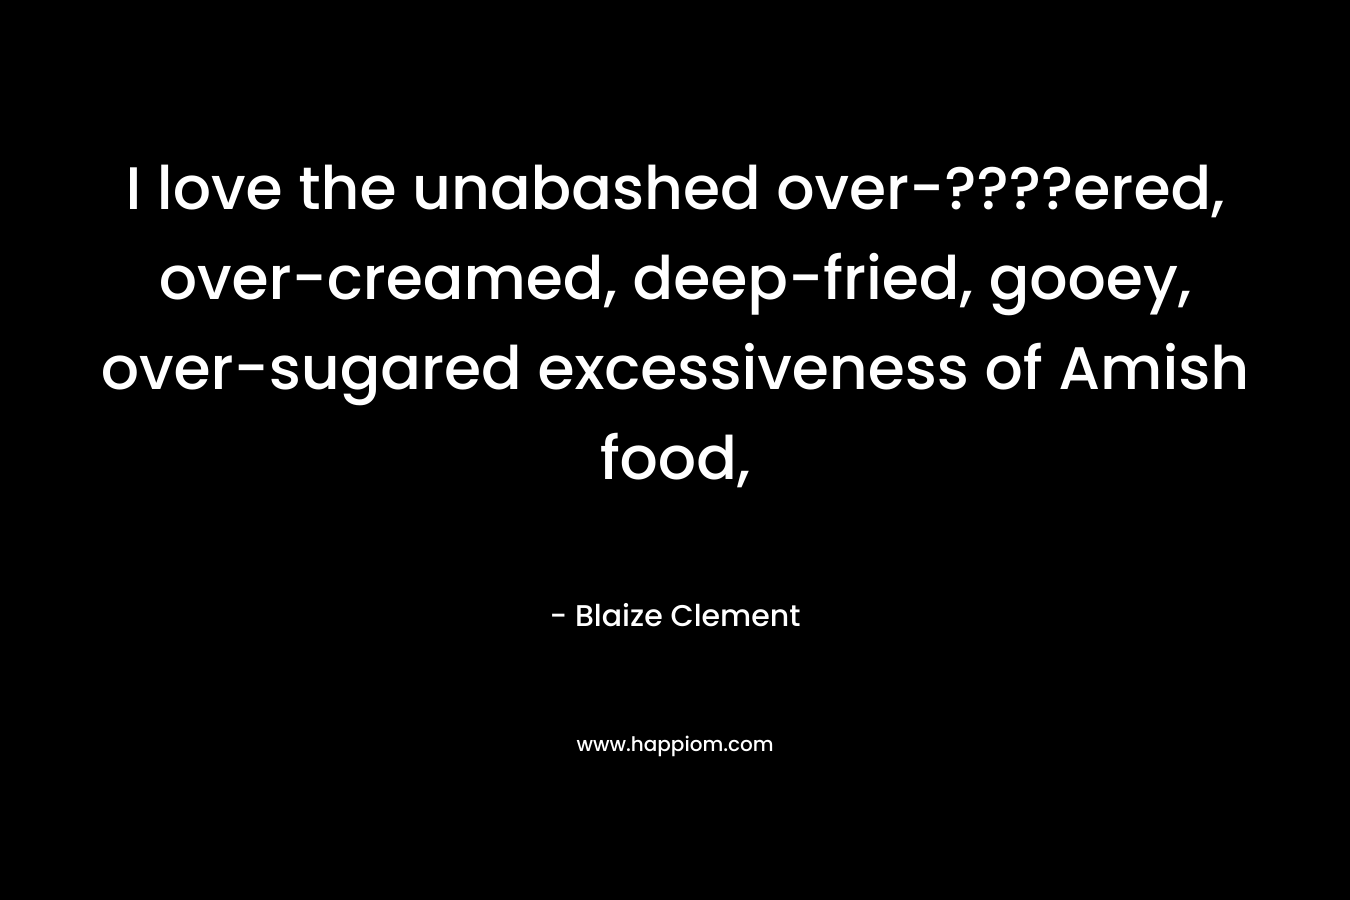 I love the unabashed over-????ered, over-creamed, deep-fried, gooey, over-sugared excessiveness of Amish food, – Blaize Clement